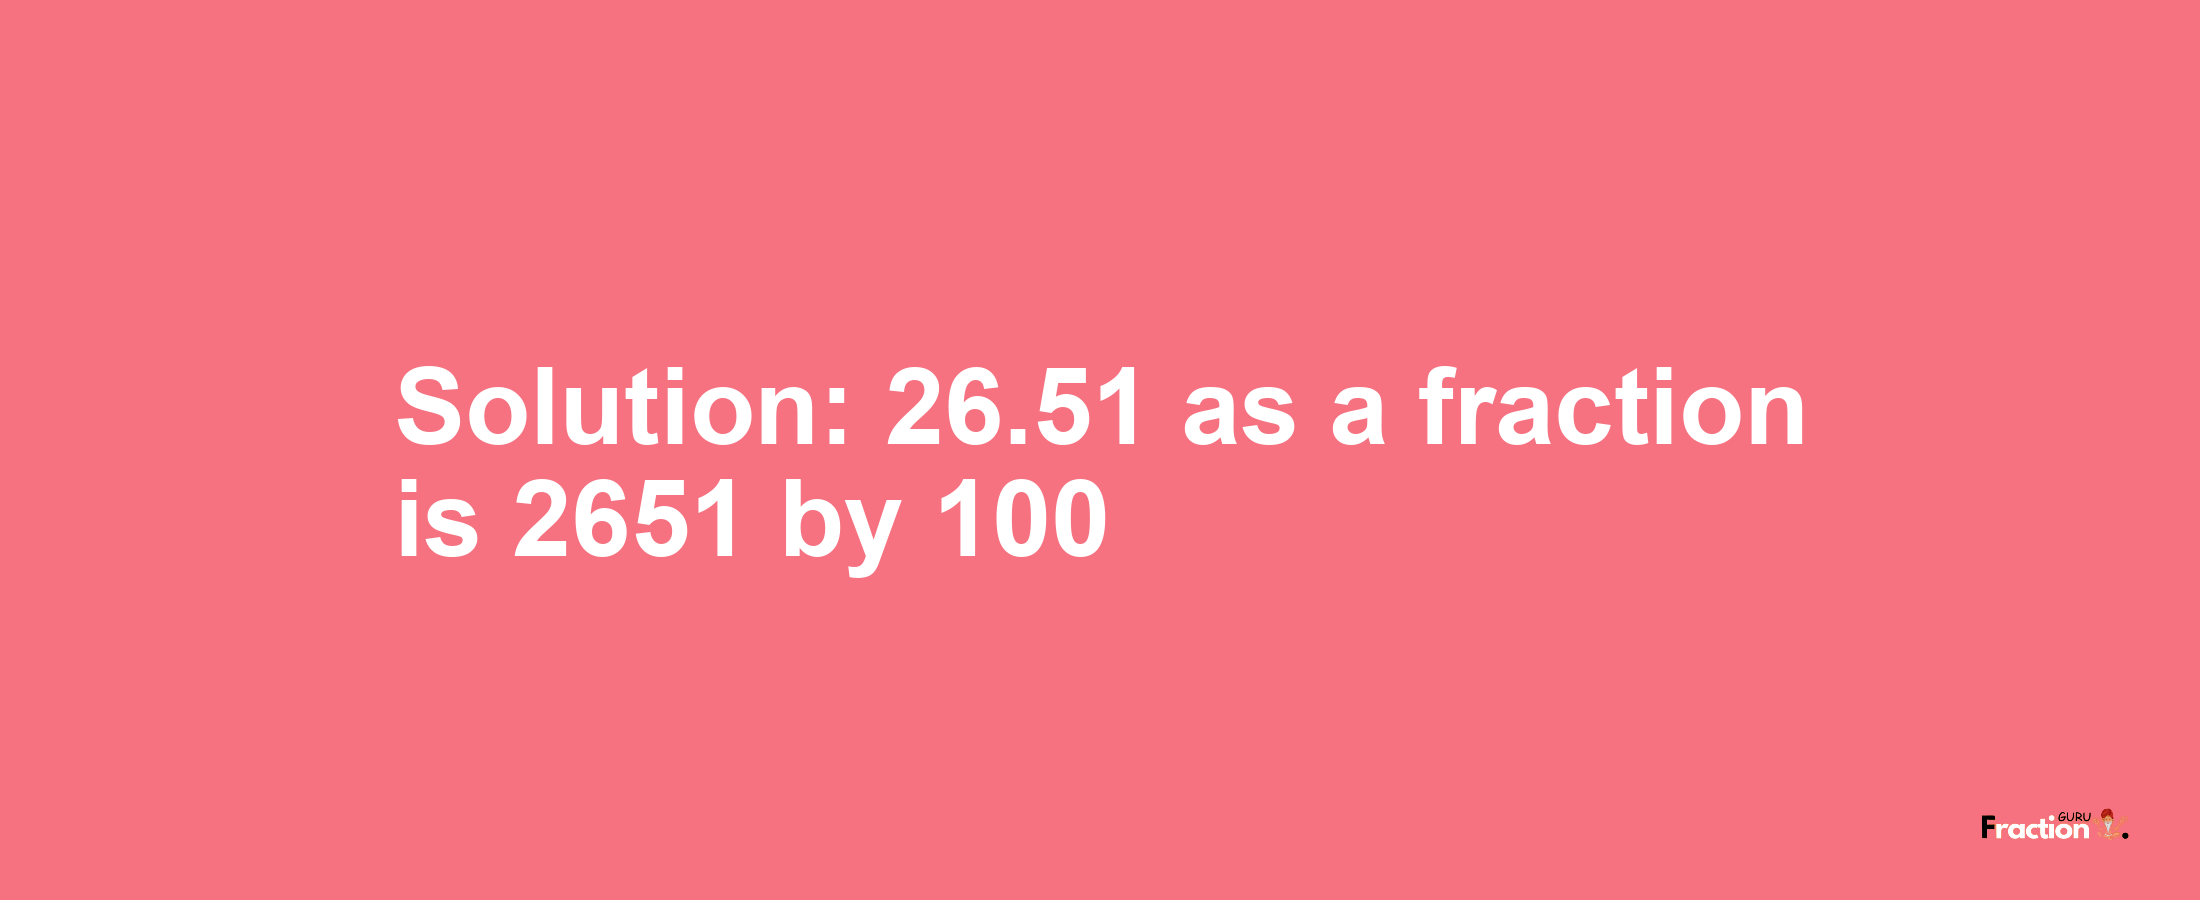 Solution:26.51 as a fraction is 2651/100